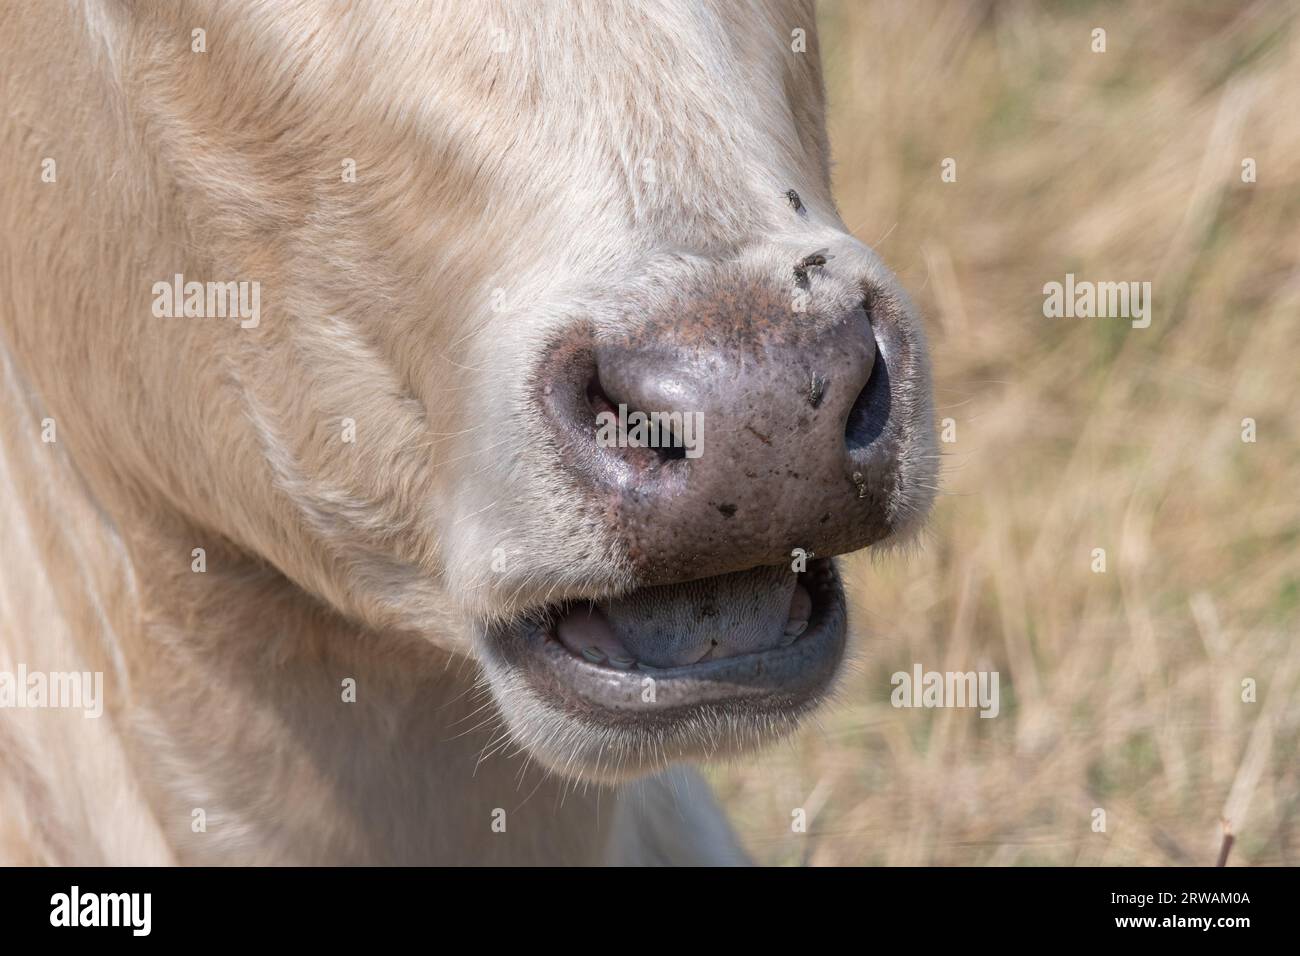 Close-up of a cow chewing the cud, ruminant animal behaviour Stock Photo